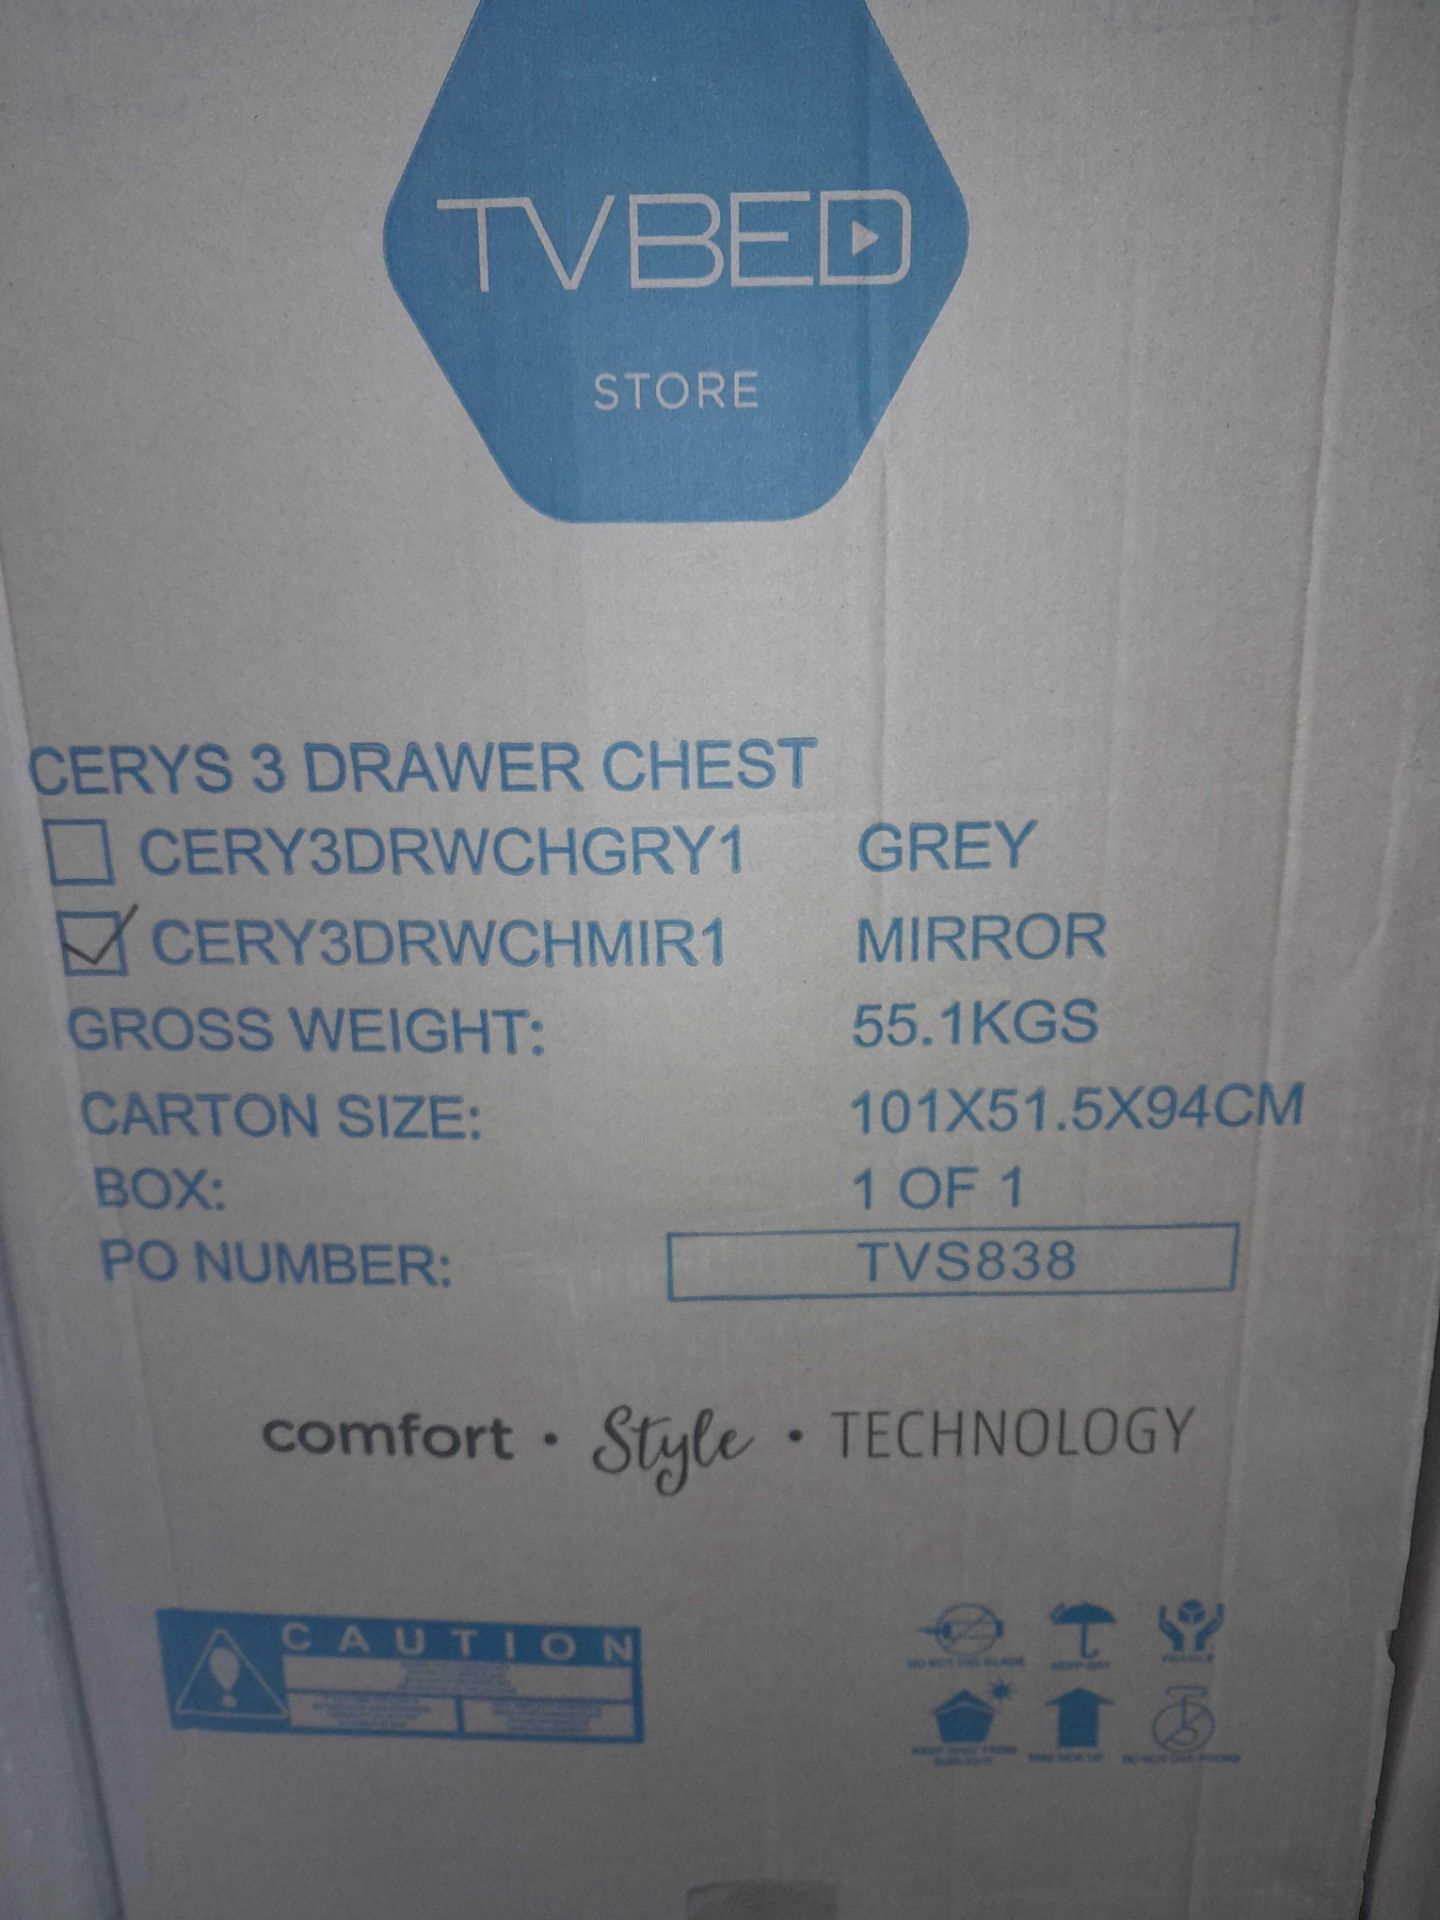 RRP £300 Brand New Tv Bed Store Cery 3 Drawer Chest Mirror Effect - Image 2 of 2